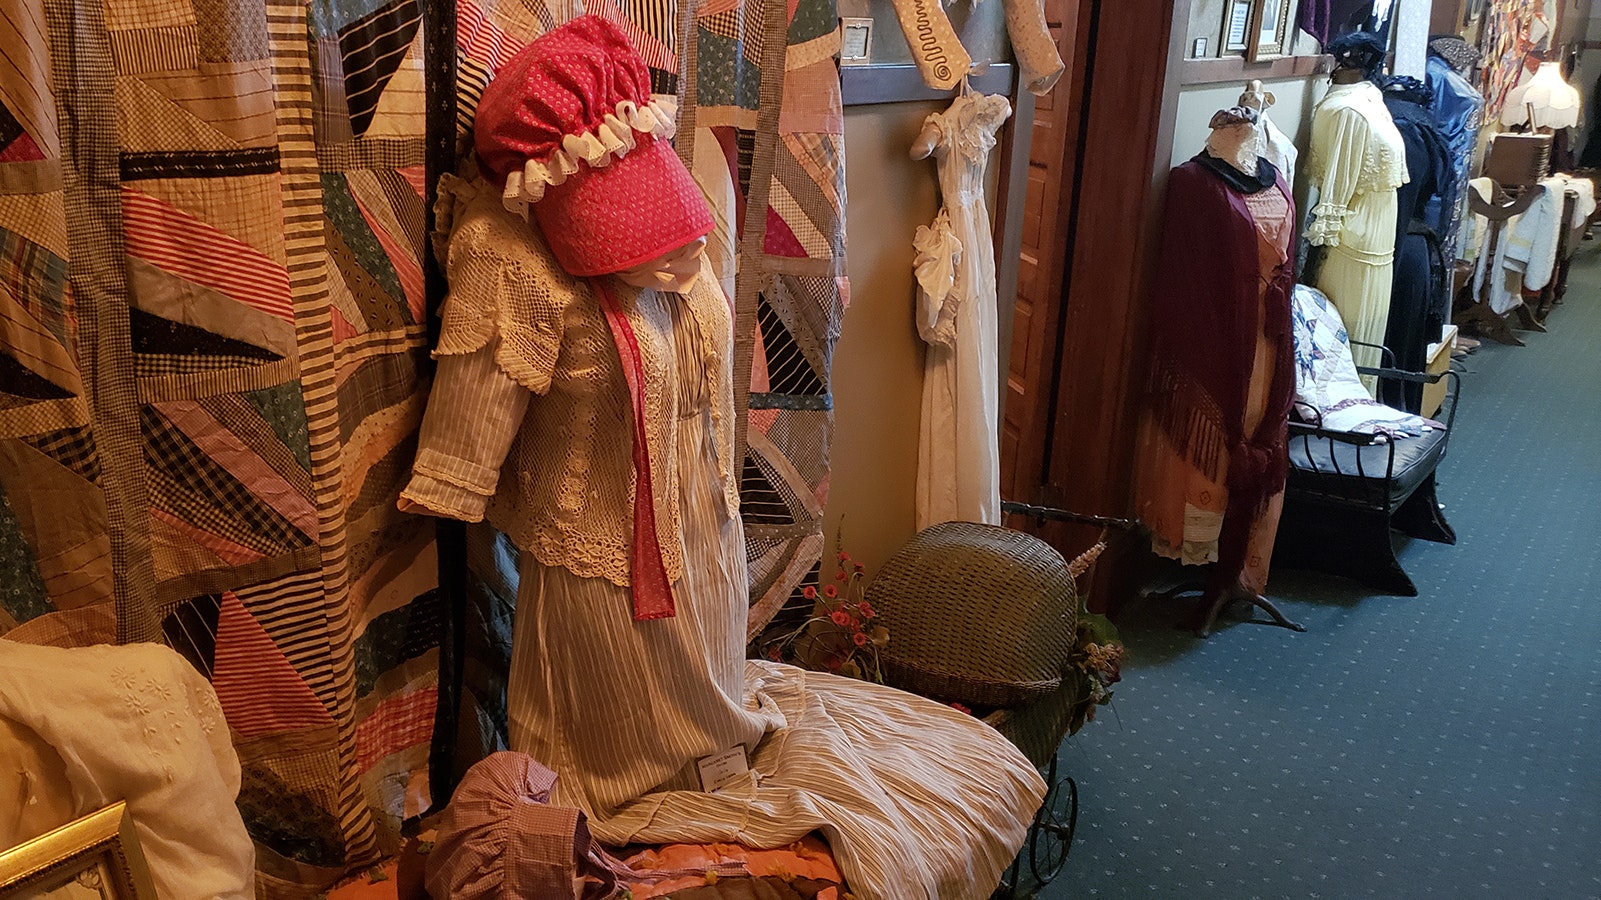 A vintage clothing display in one of the corridors of the hotel, which is also a registered museum.